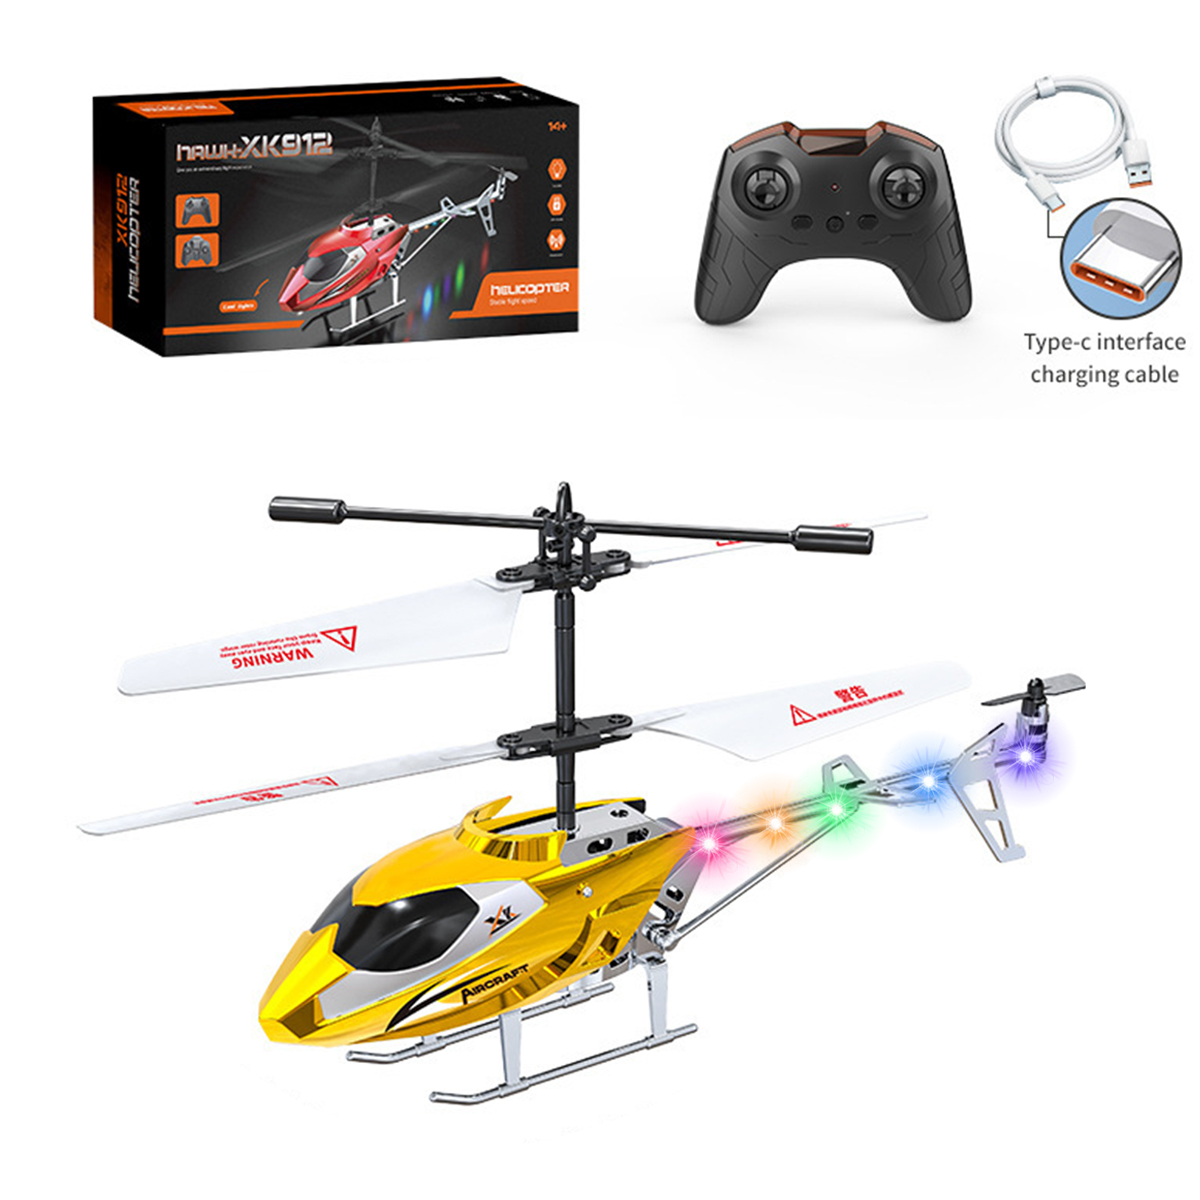 PayUSD Remote Control Helicopter Mini Gyroscope RC Helicopters LED Light for Indoor to Fly for Kids and Beginners, Yellow - image 1 of 8